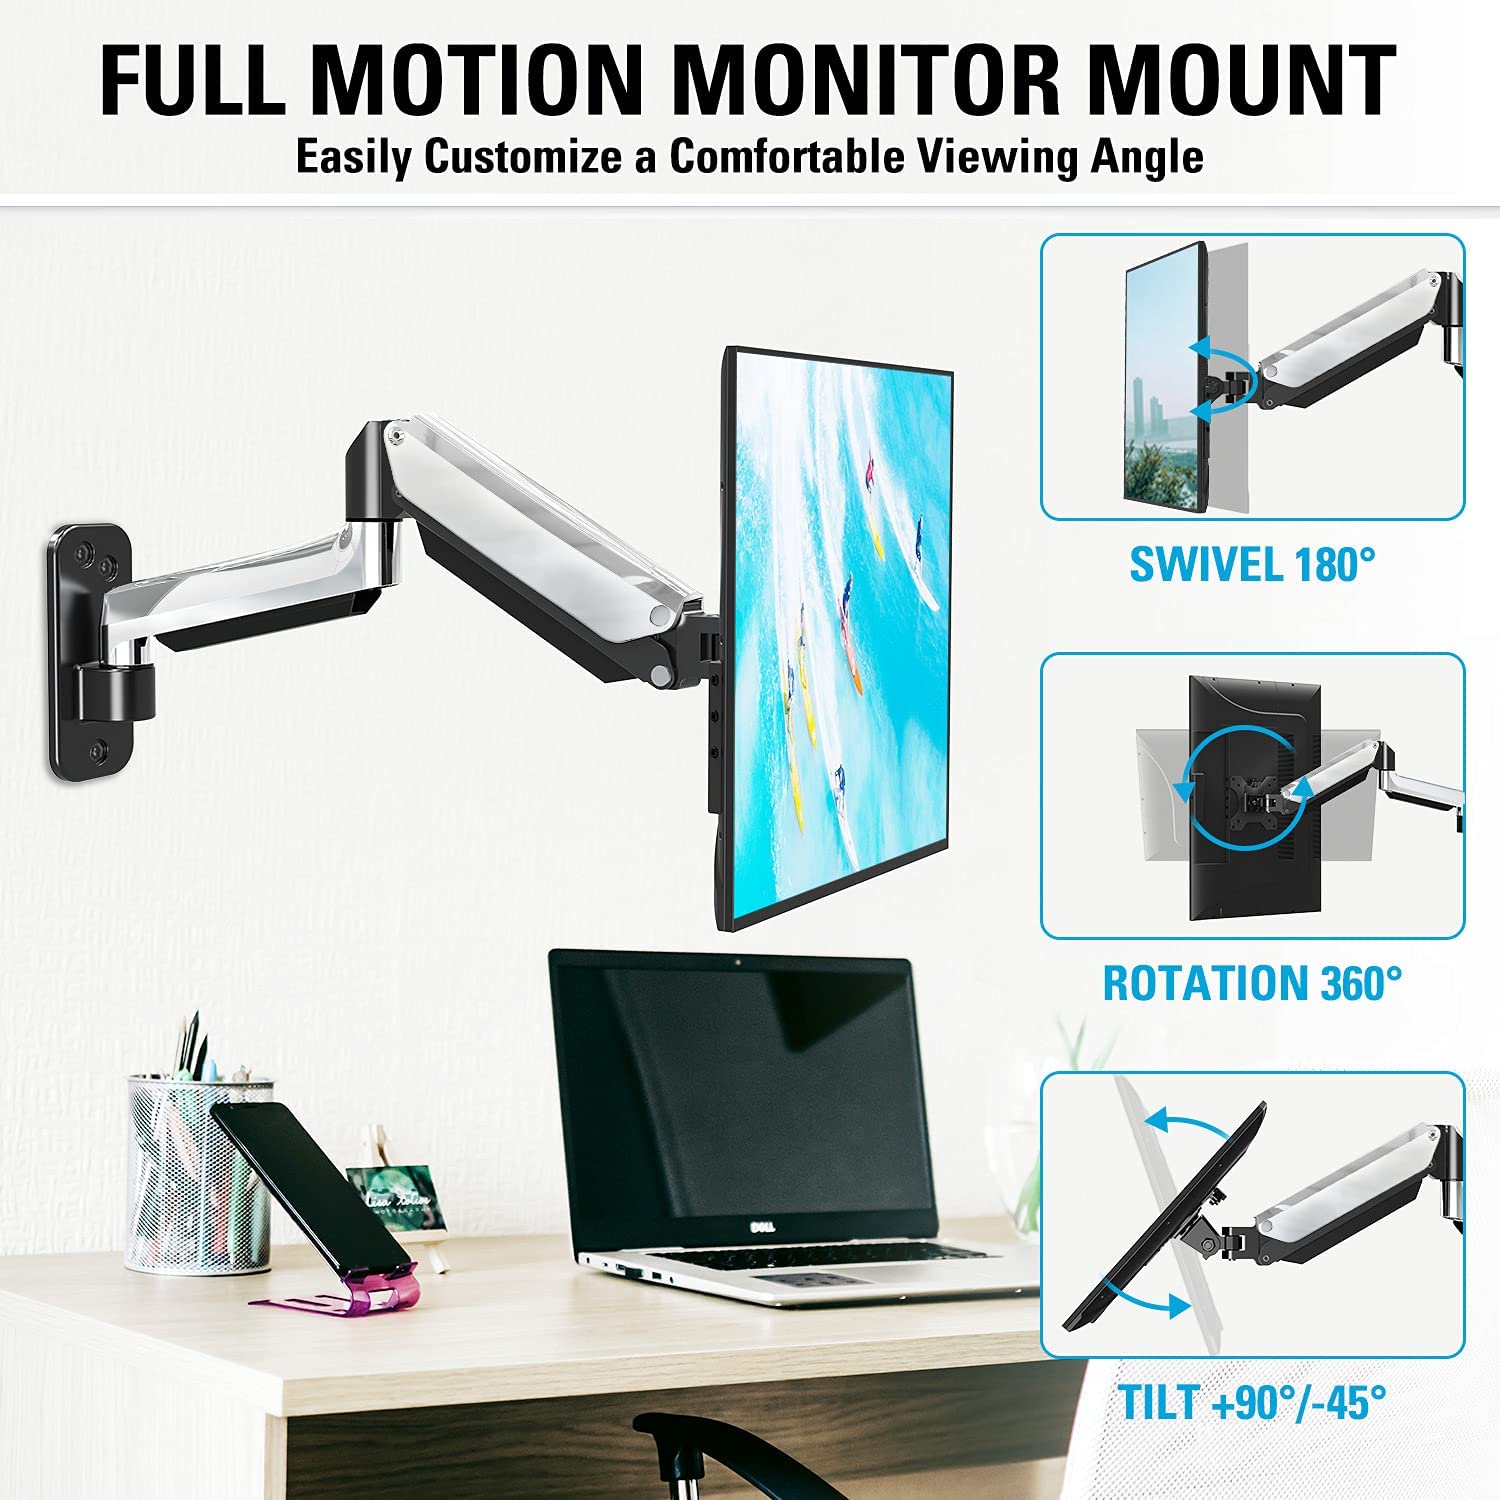 full motion monitor wall mount customizes a better viewing angle